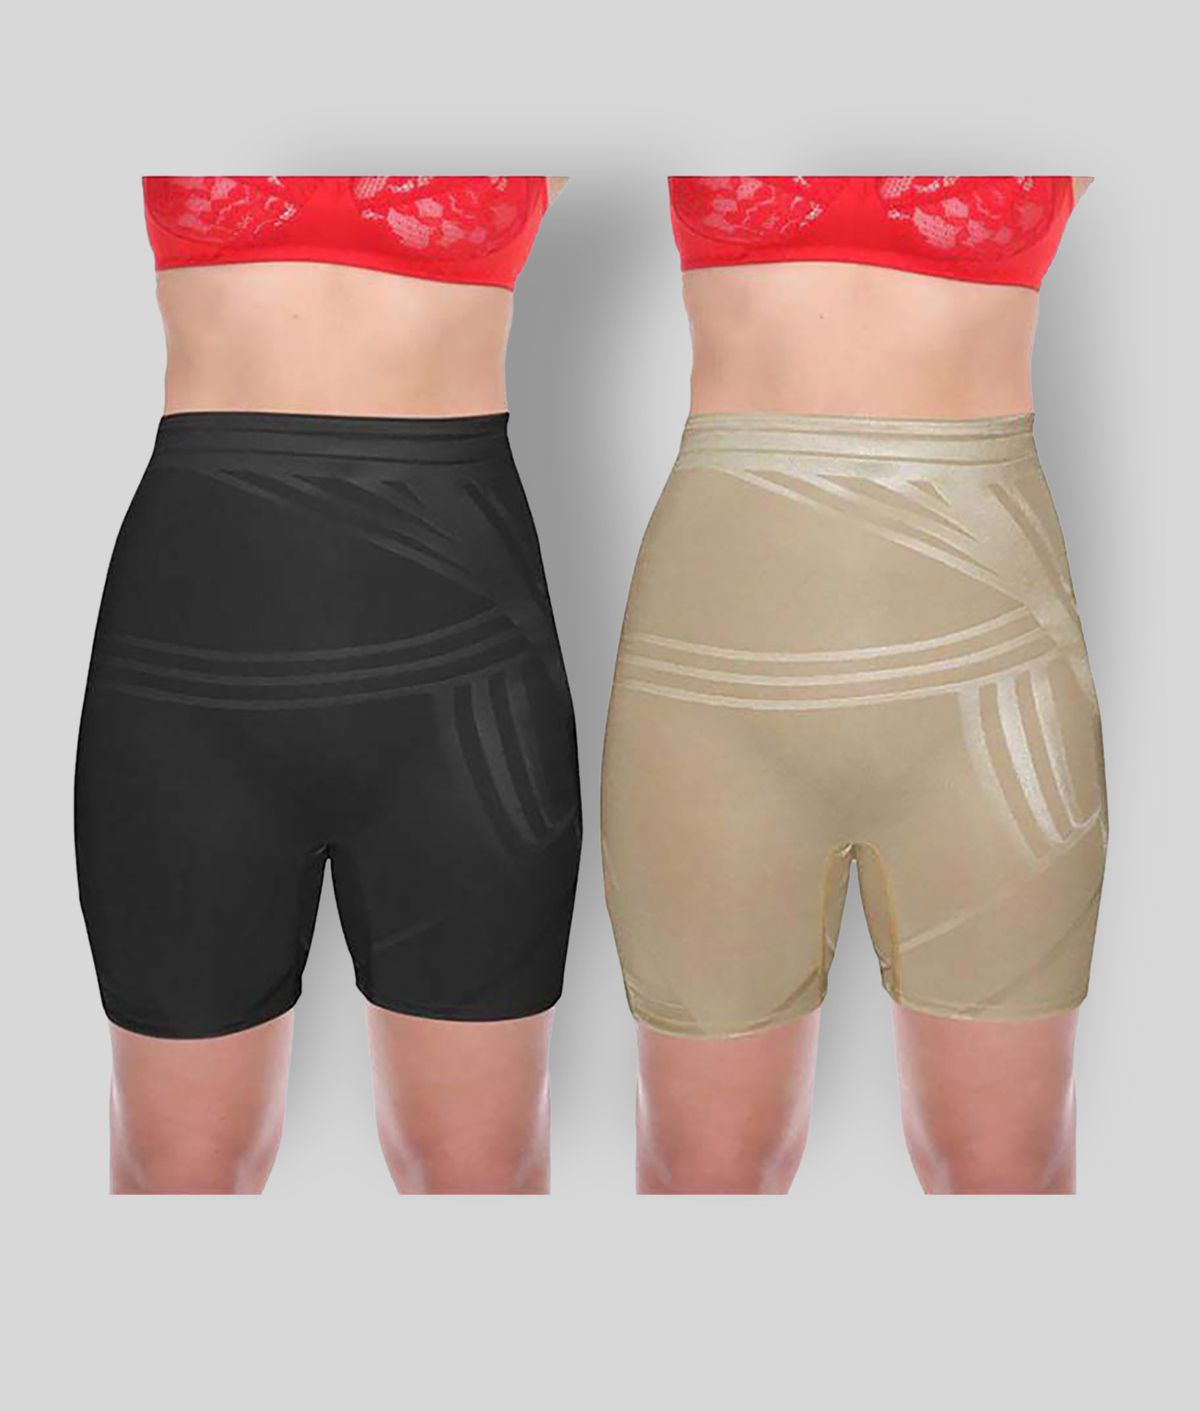     			Selfcare Polyester Trimming Tights Shapewear